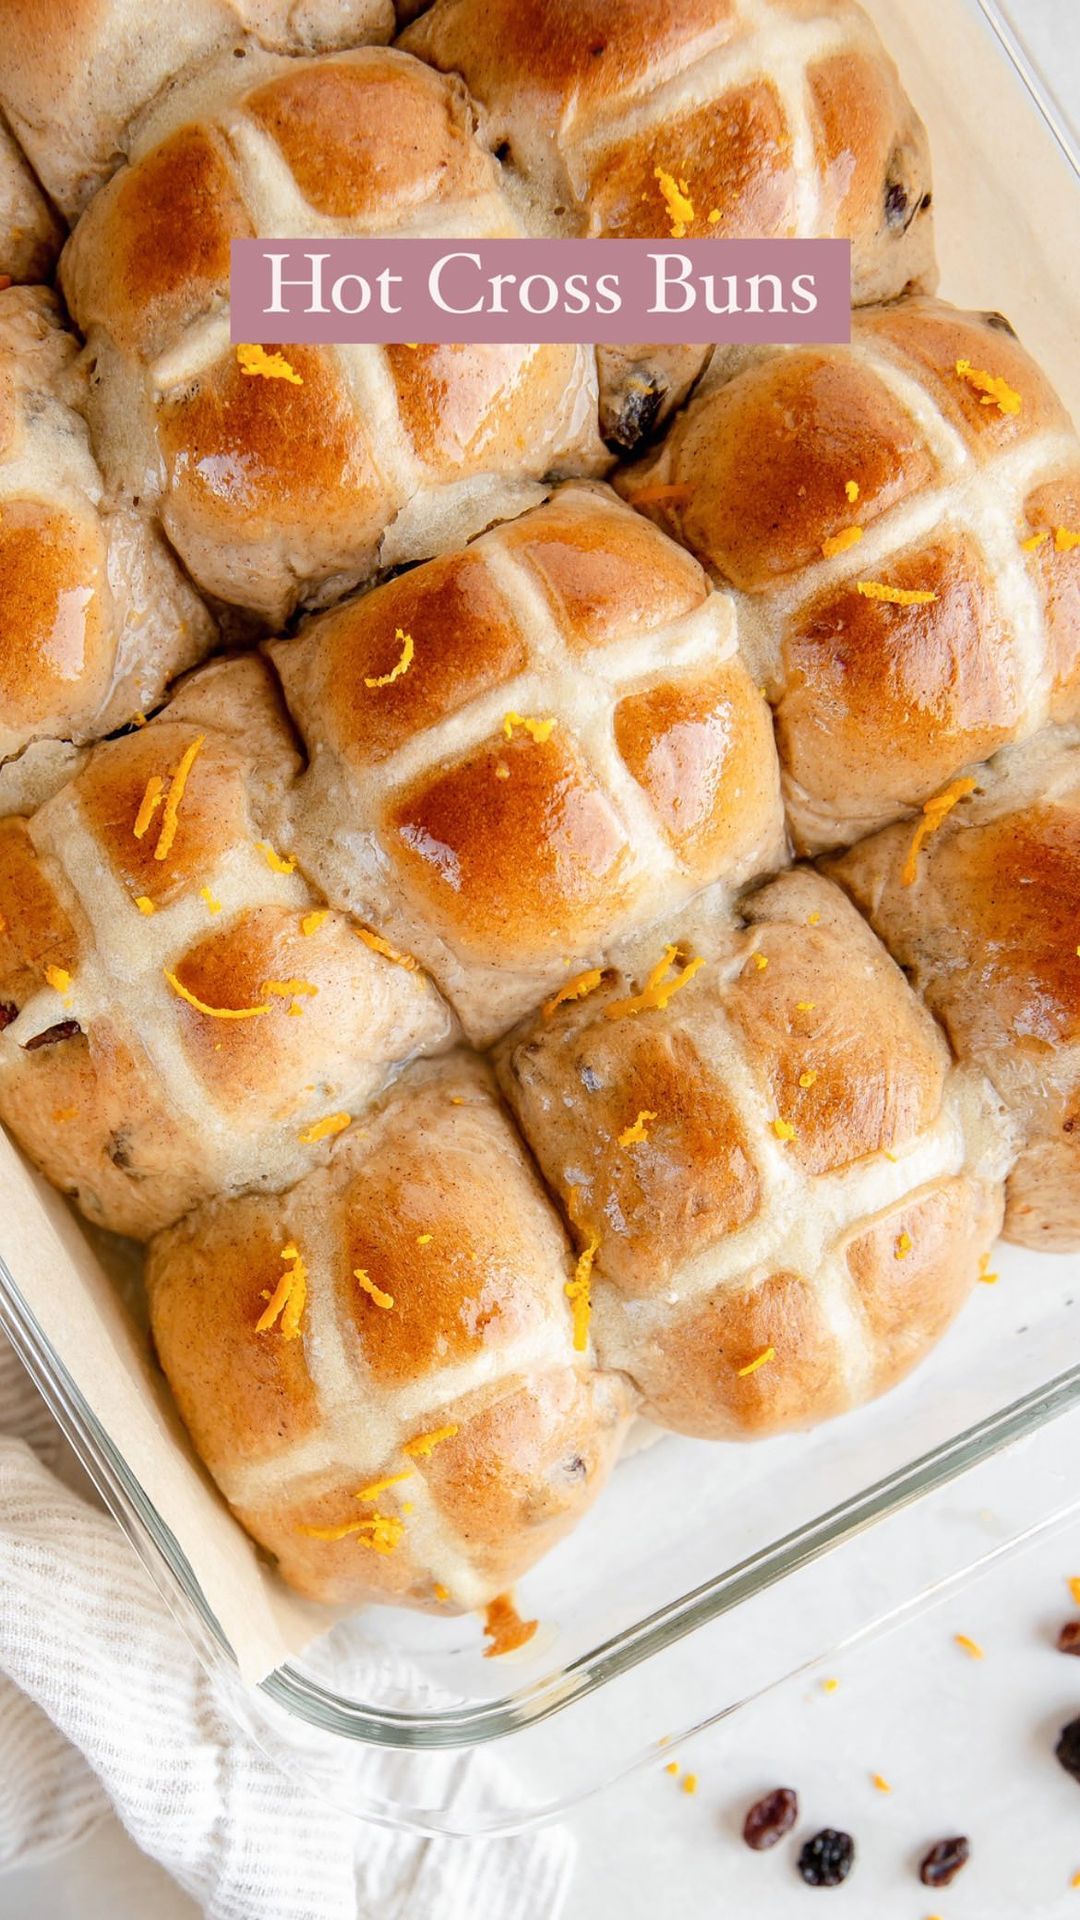 Traditional Hot Cross Buns with a Citrus Twist